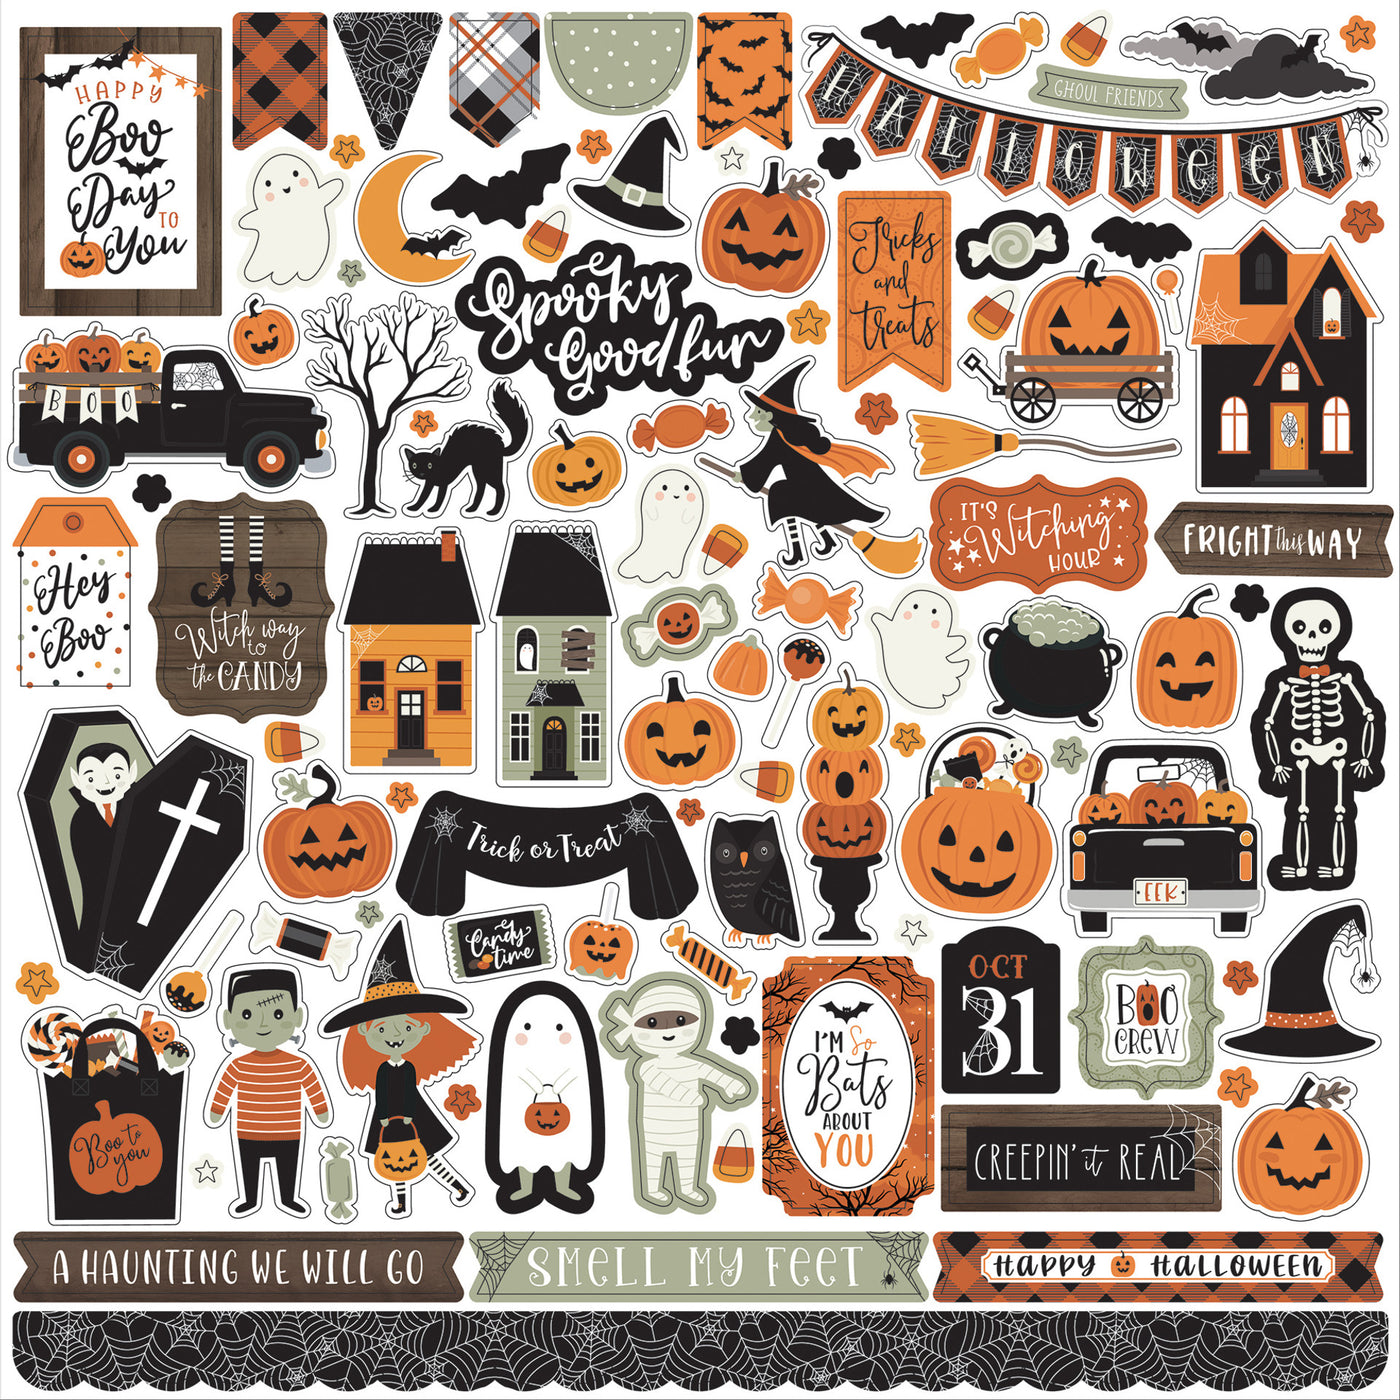 Spooky Elements 12" x 12" Cardstock Stickers from the Spooky Collection by Echo Park. Stickers include phrases, frames, pumpkins, ghosts, skeletons, and more!